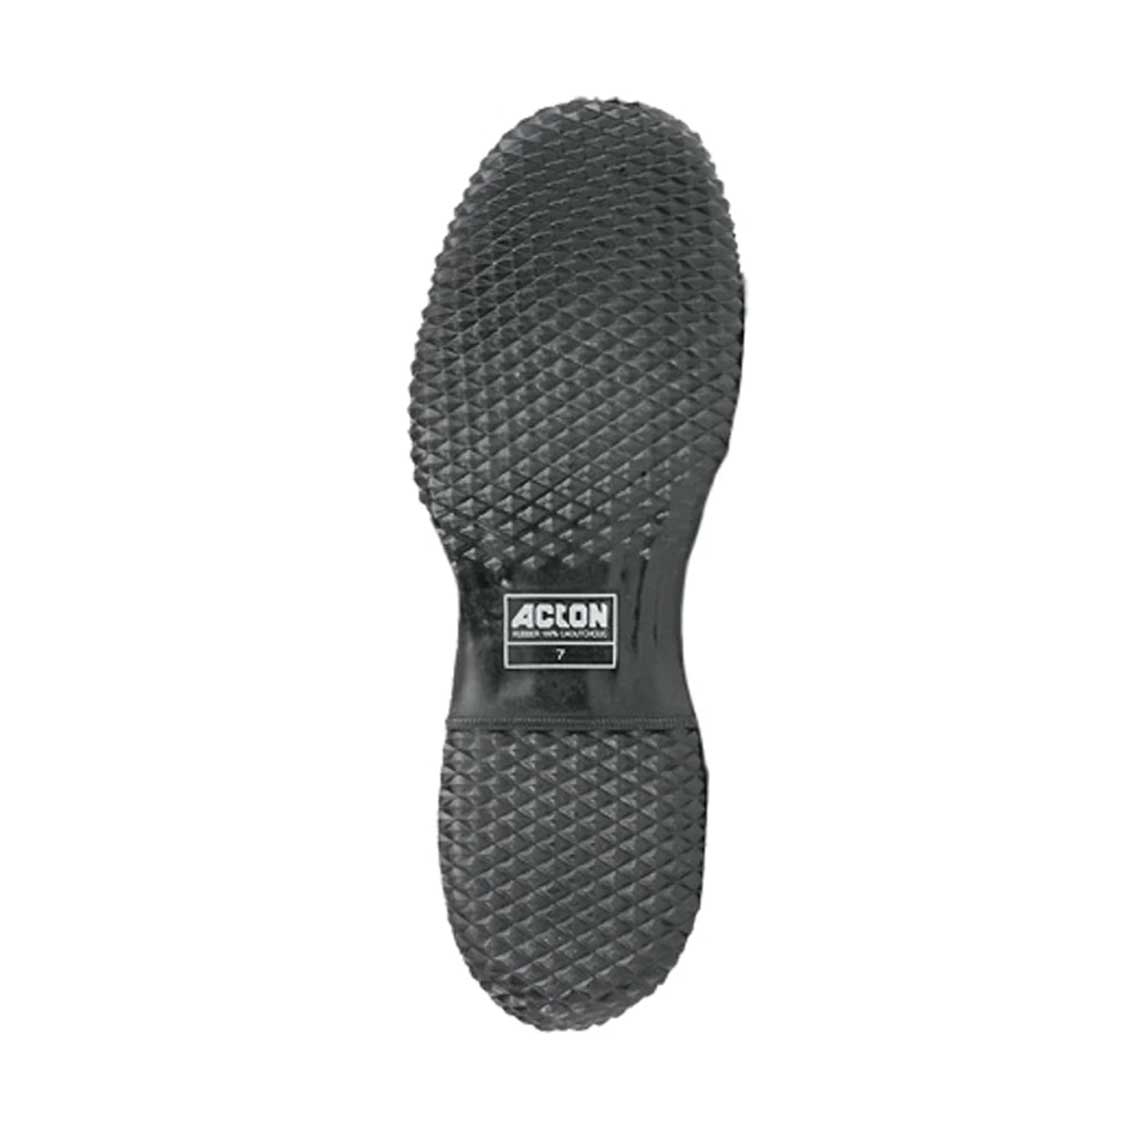 acton joule overshoes 2